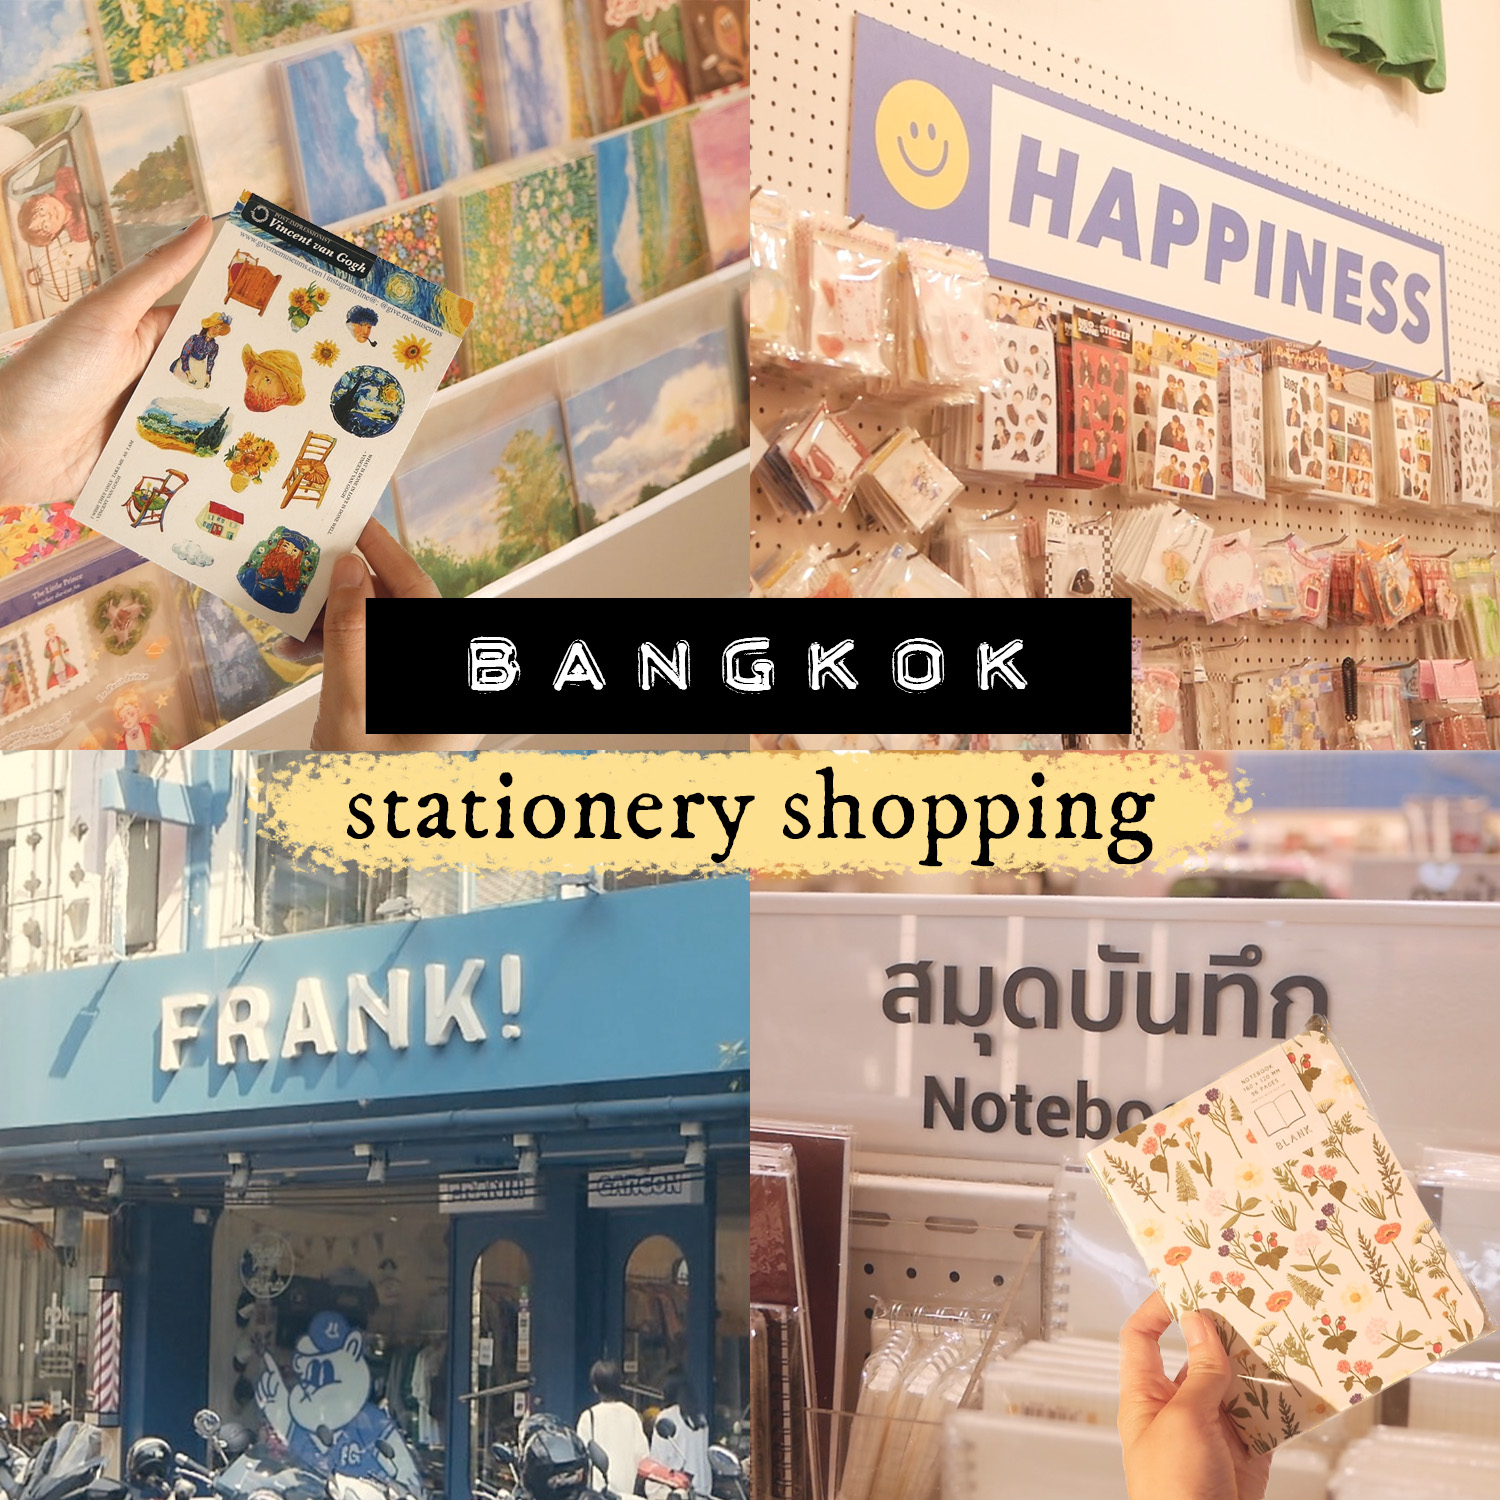 Aesthetic and Fun Bangkok Stationery Shops You Must Visit